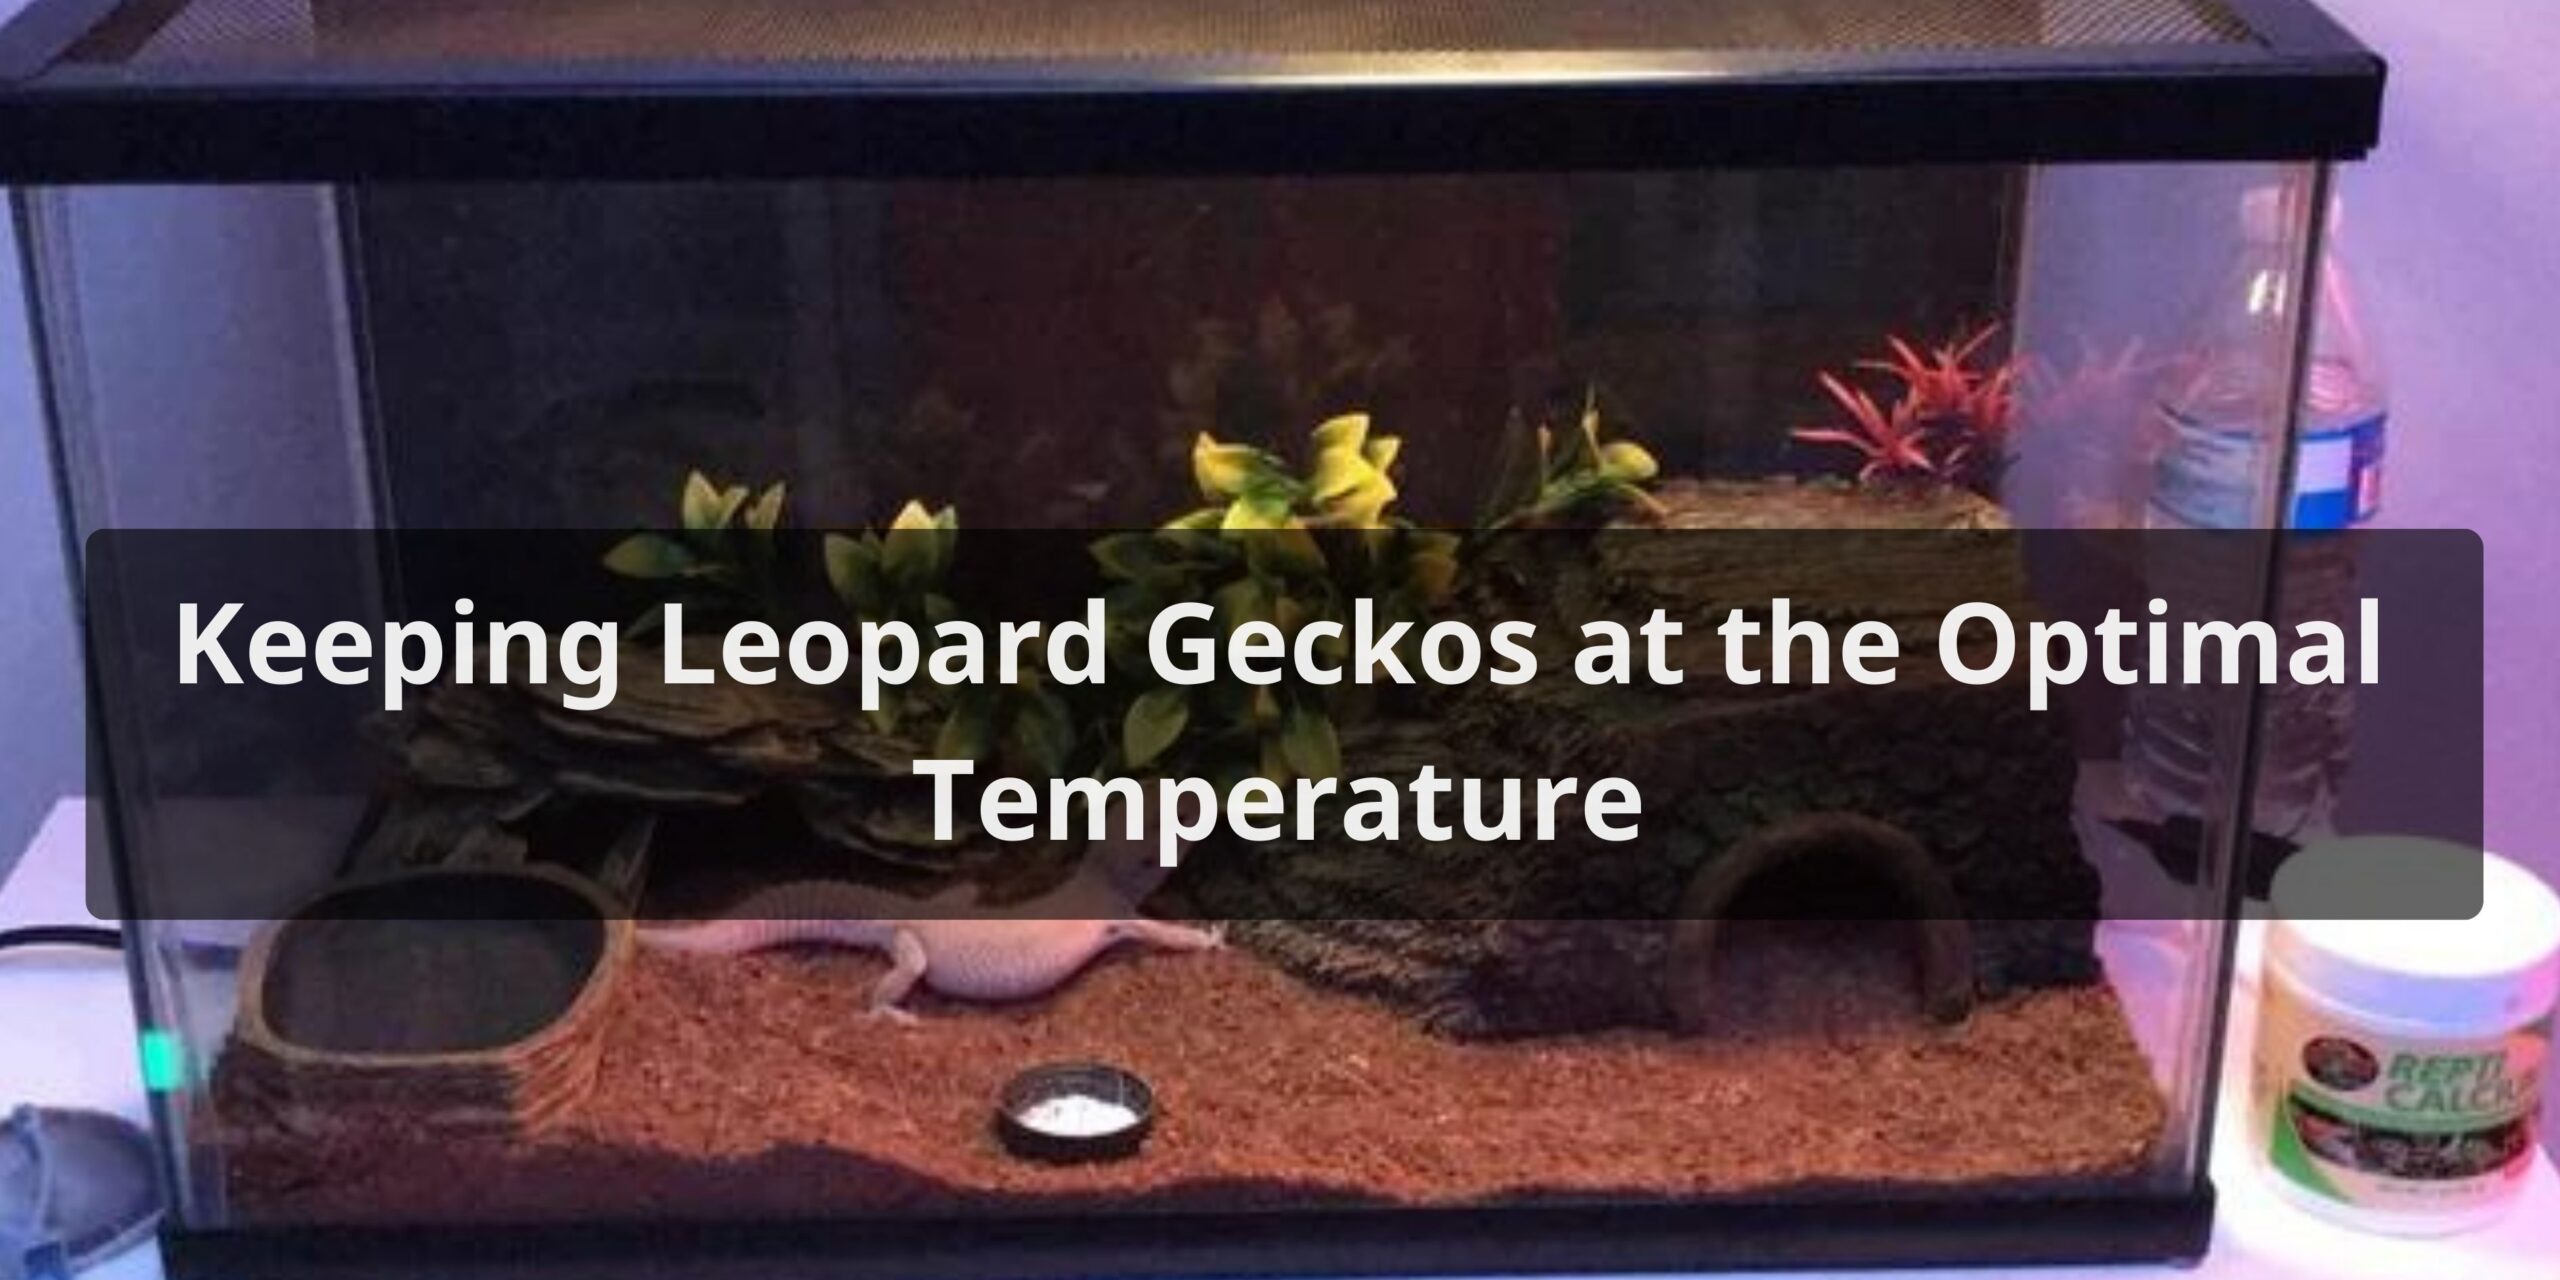 Keeping Leopard Geckos at the Optimal Temperature